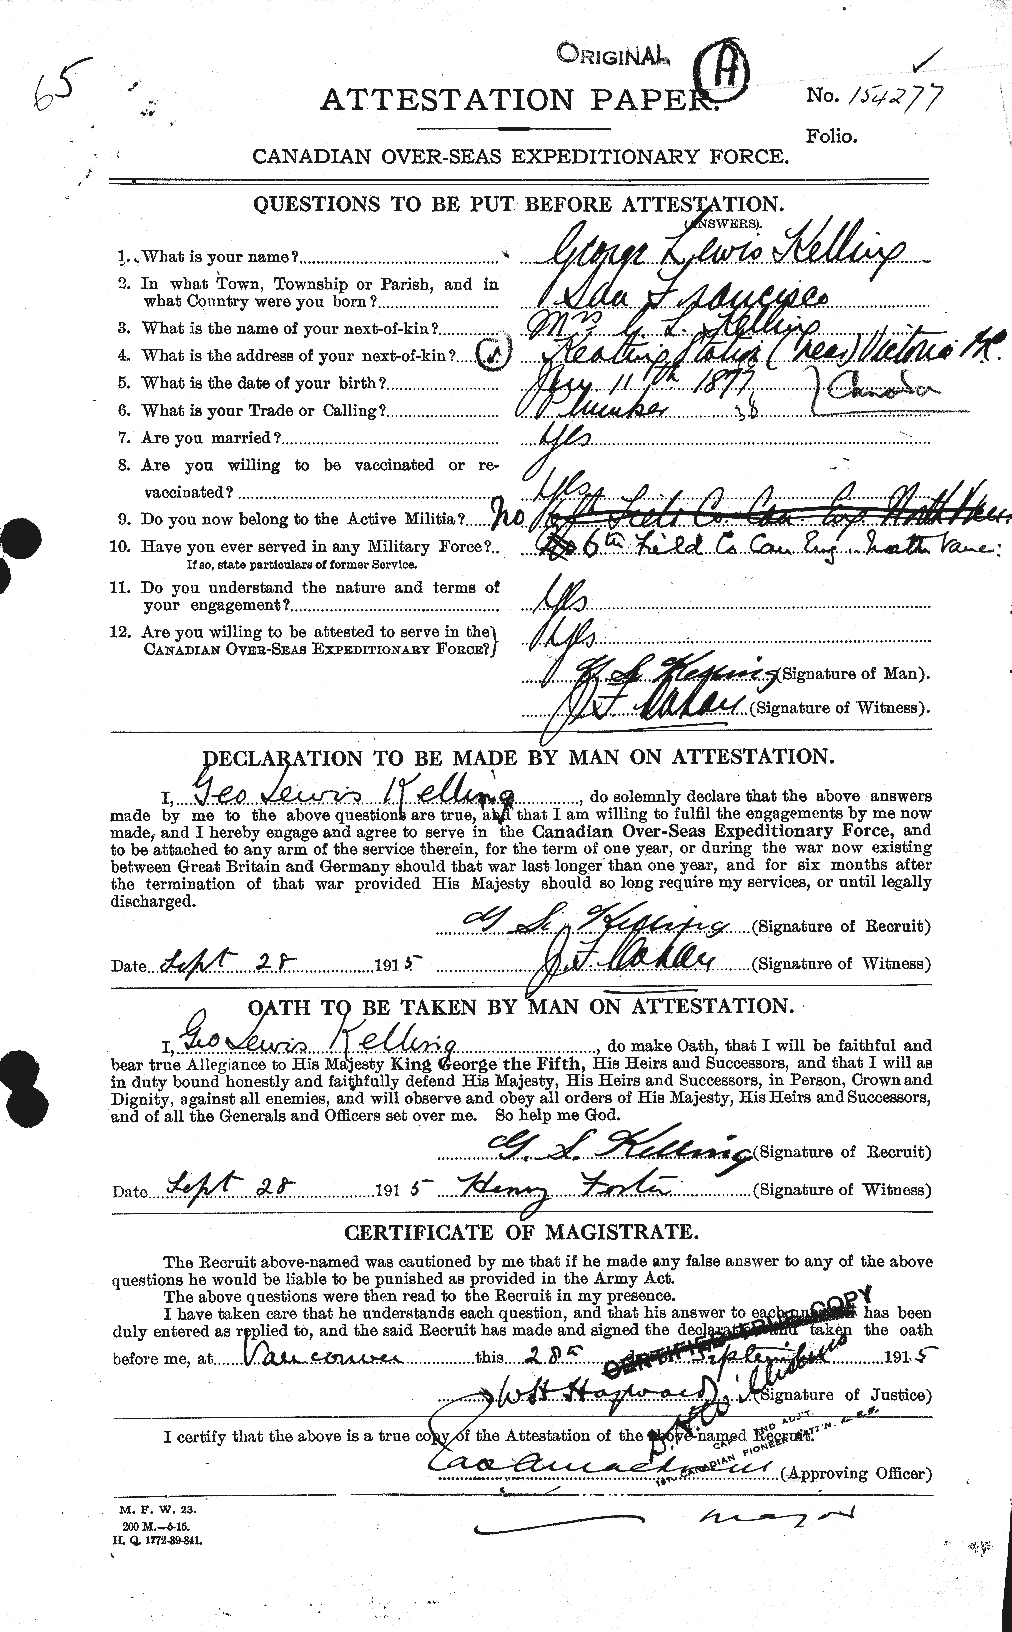 Personnel Records of the First World War - CEF 429117a